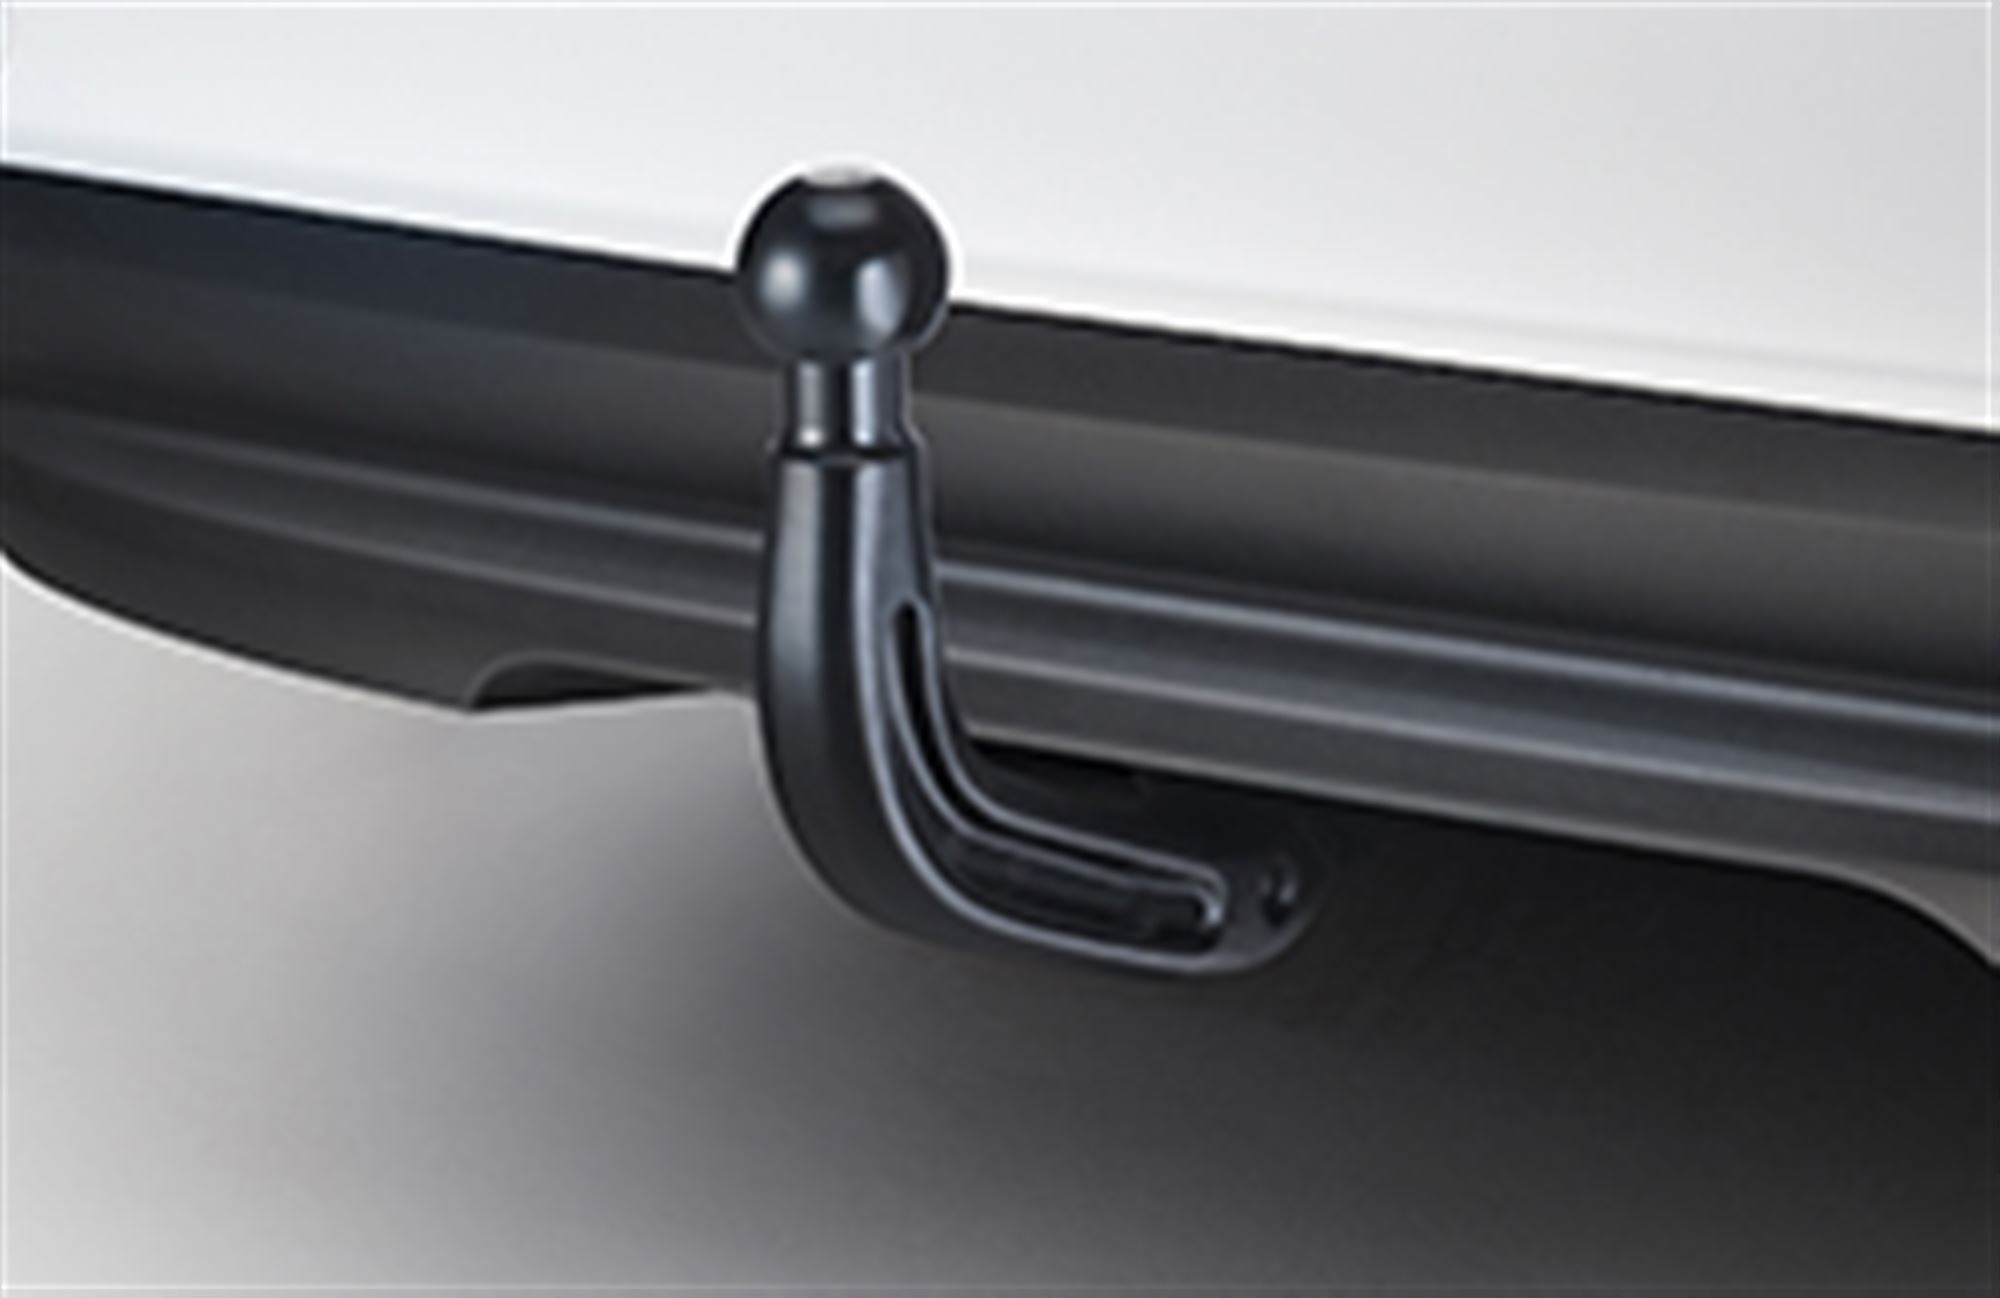 Towing System - Electrically Deployable Tow Bar - T4N7119